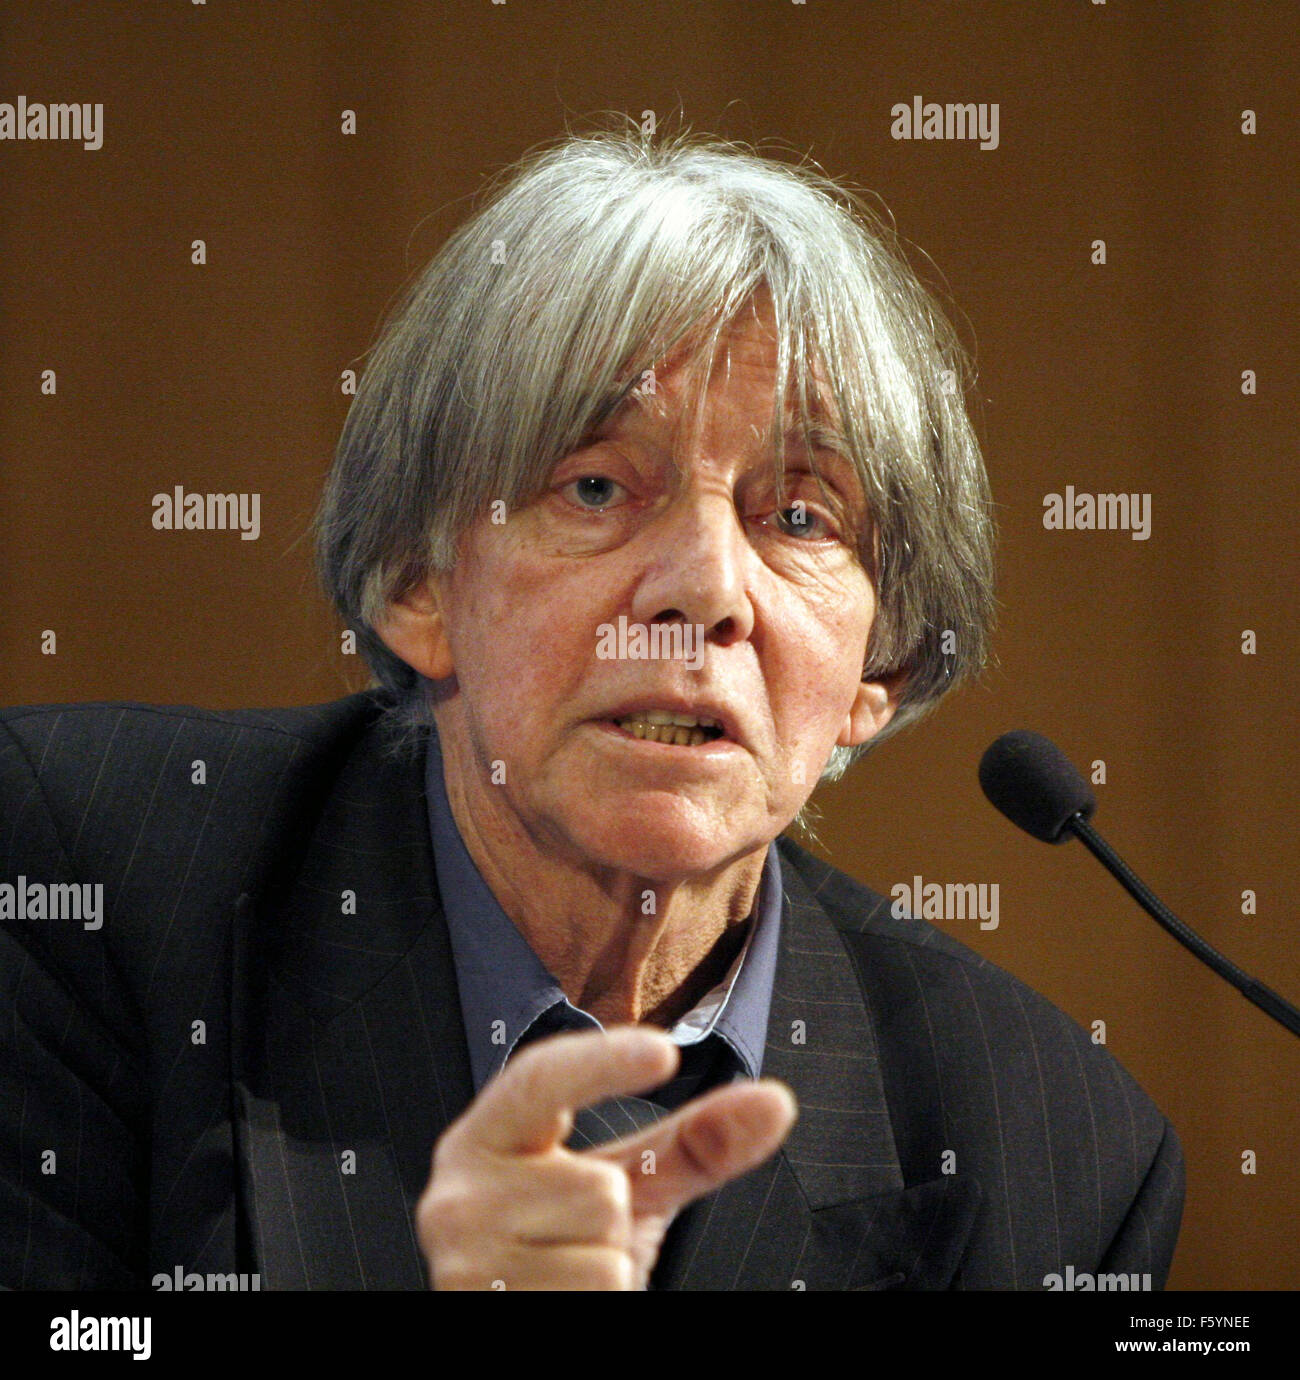 (File) French Writer and Philosopher André Glucksmann speaks at the Dahlem Humanties Center of the Berlin Free University in Berlin on 08 January 2008. Photo: Claudia Esch-Kenkel (c) dpa - Report Stock Photo